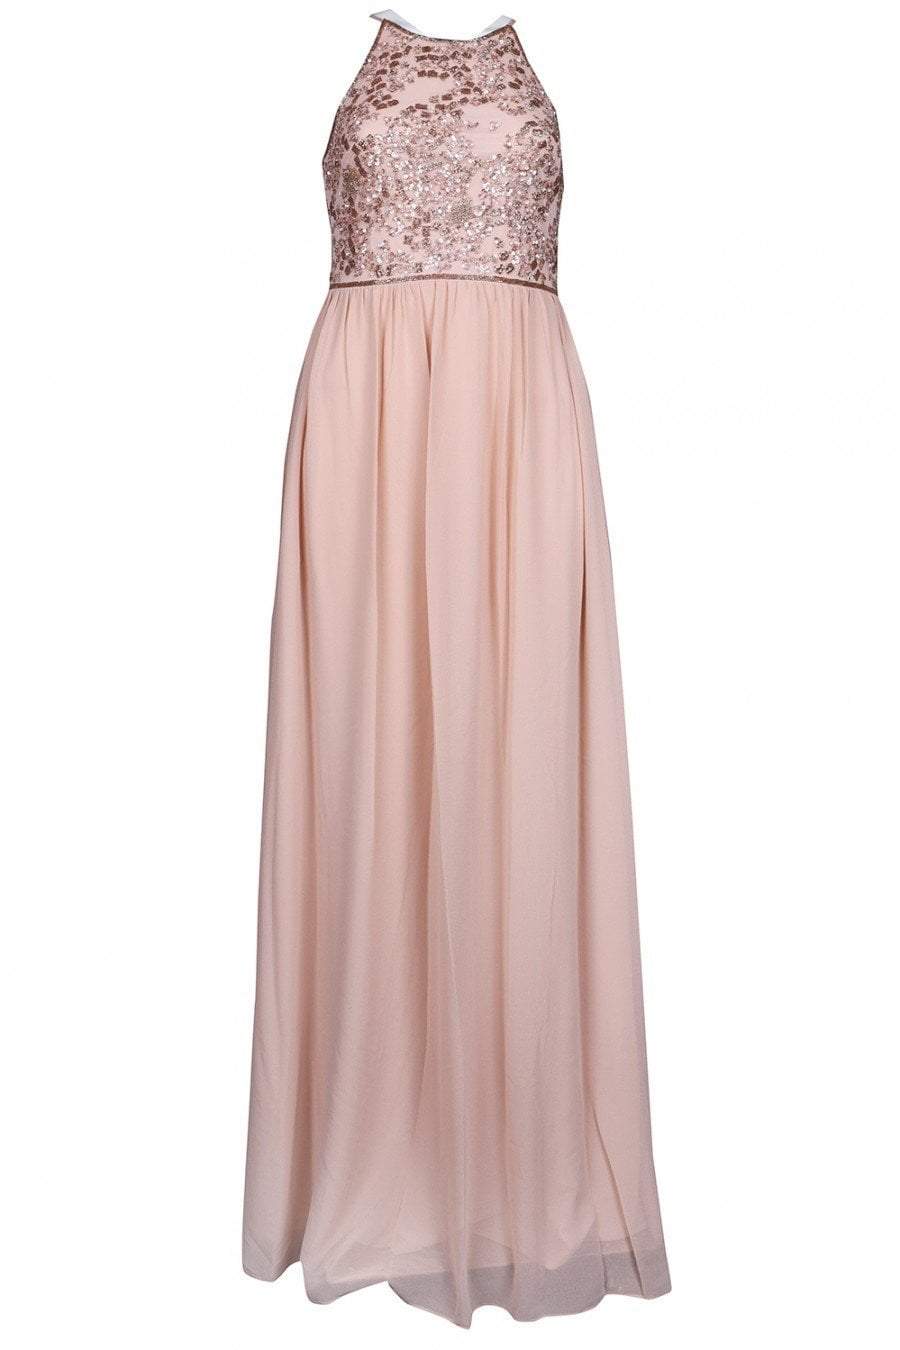 Adrianna Papell - AP1E203111 Bedazzled Halter Chiffon A-line Dress In Pink